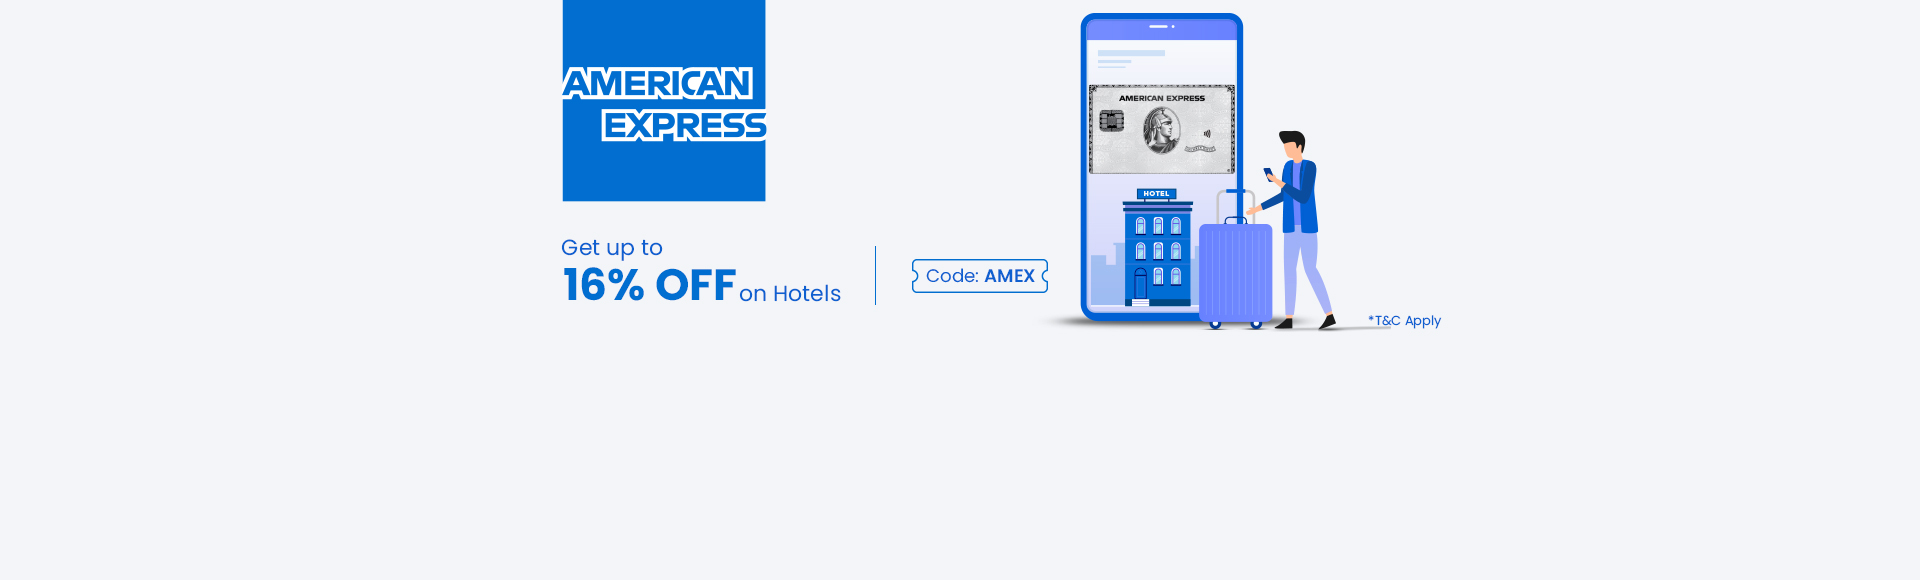 AMEX offer